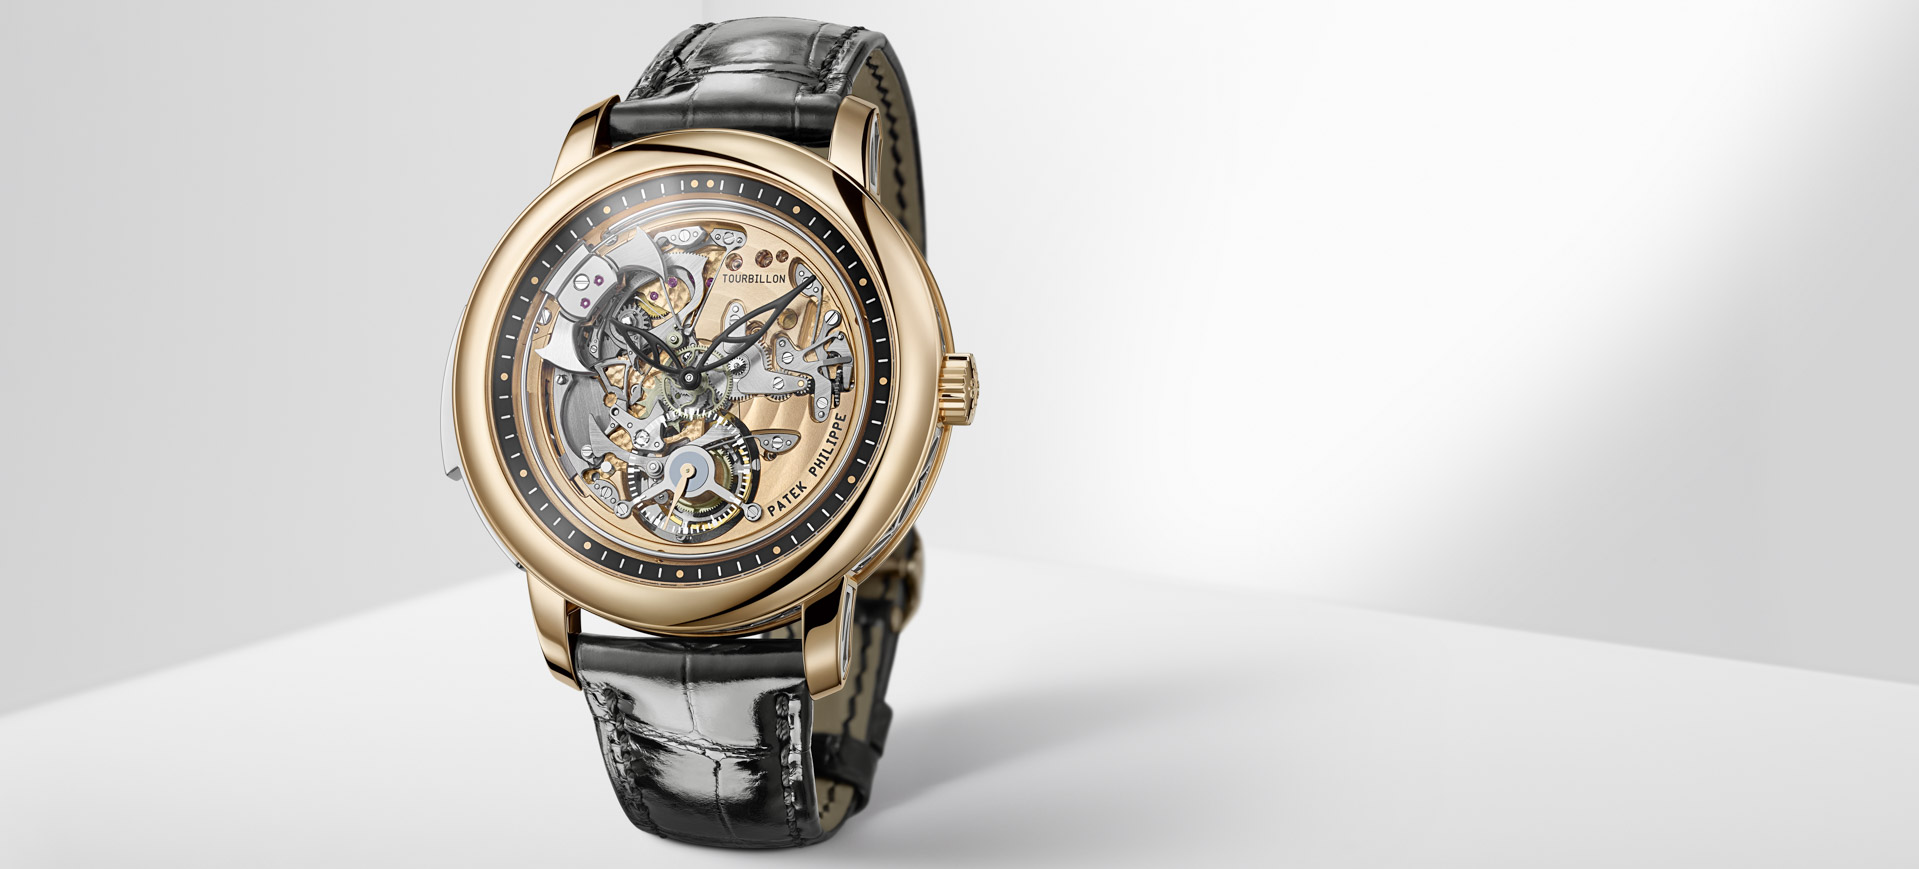 First Look: Patek Philippe 5303R Minute Repeater Tourbillon Grand Complication Watch